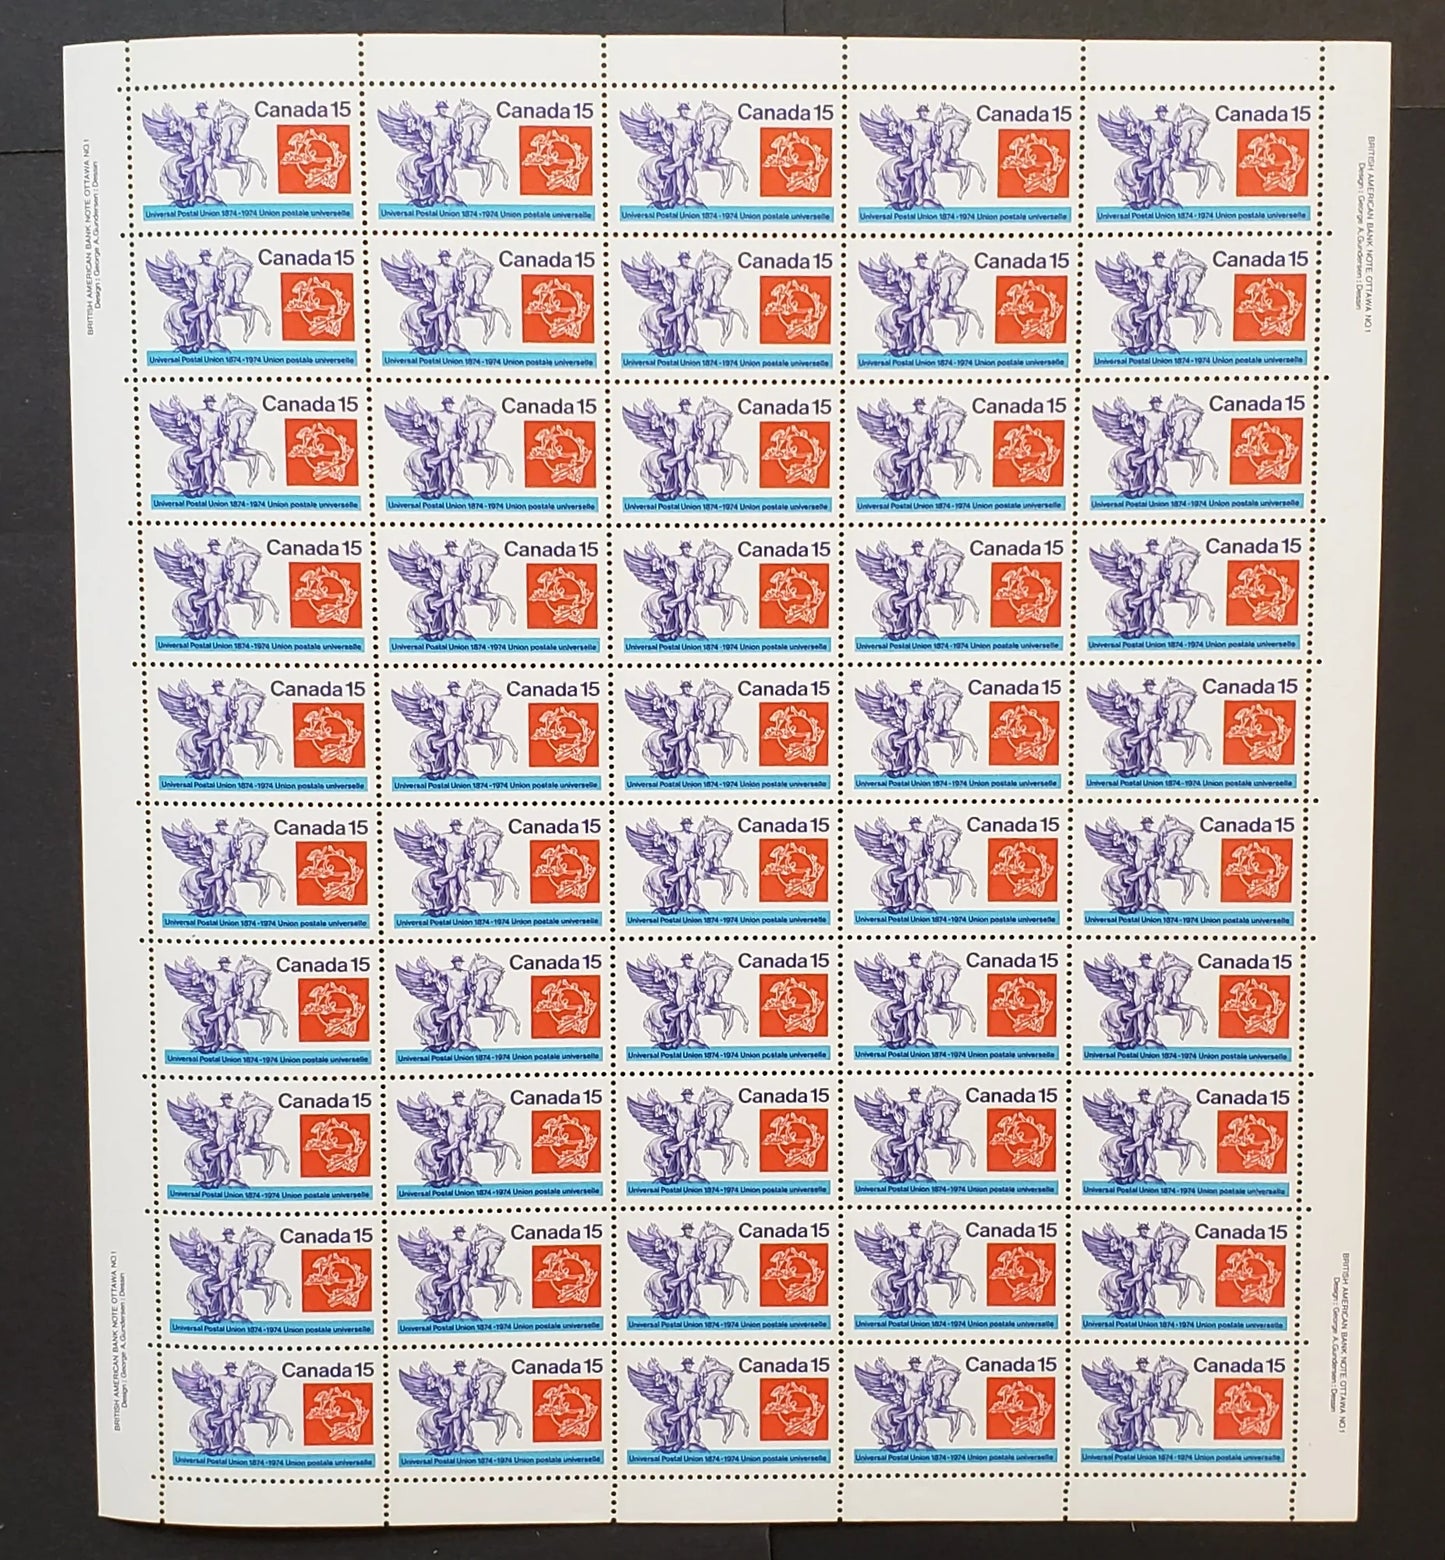 Lot 68 Canada #649 15c Violet, Red and Blue Mercury, 1974 UPU Centenary Issue, Philatelic Stock Sheet Of 50, LF/LF Horizontal Ribbed Paper, VF-80 NH, Unfolded,  Unitrade Cat. As Singles $67.5,